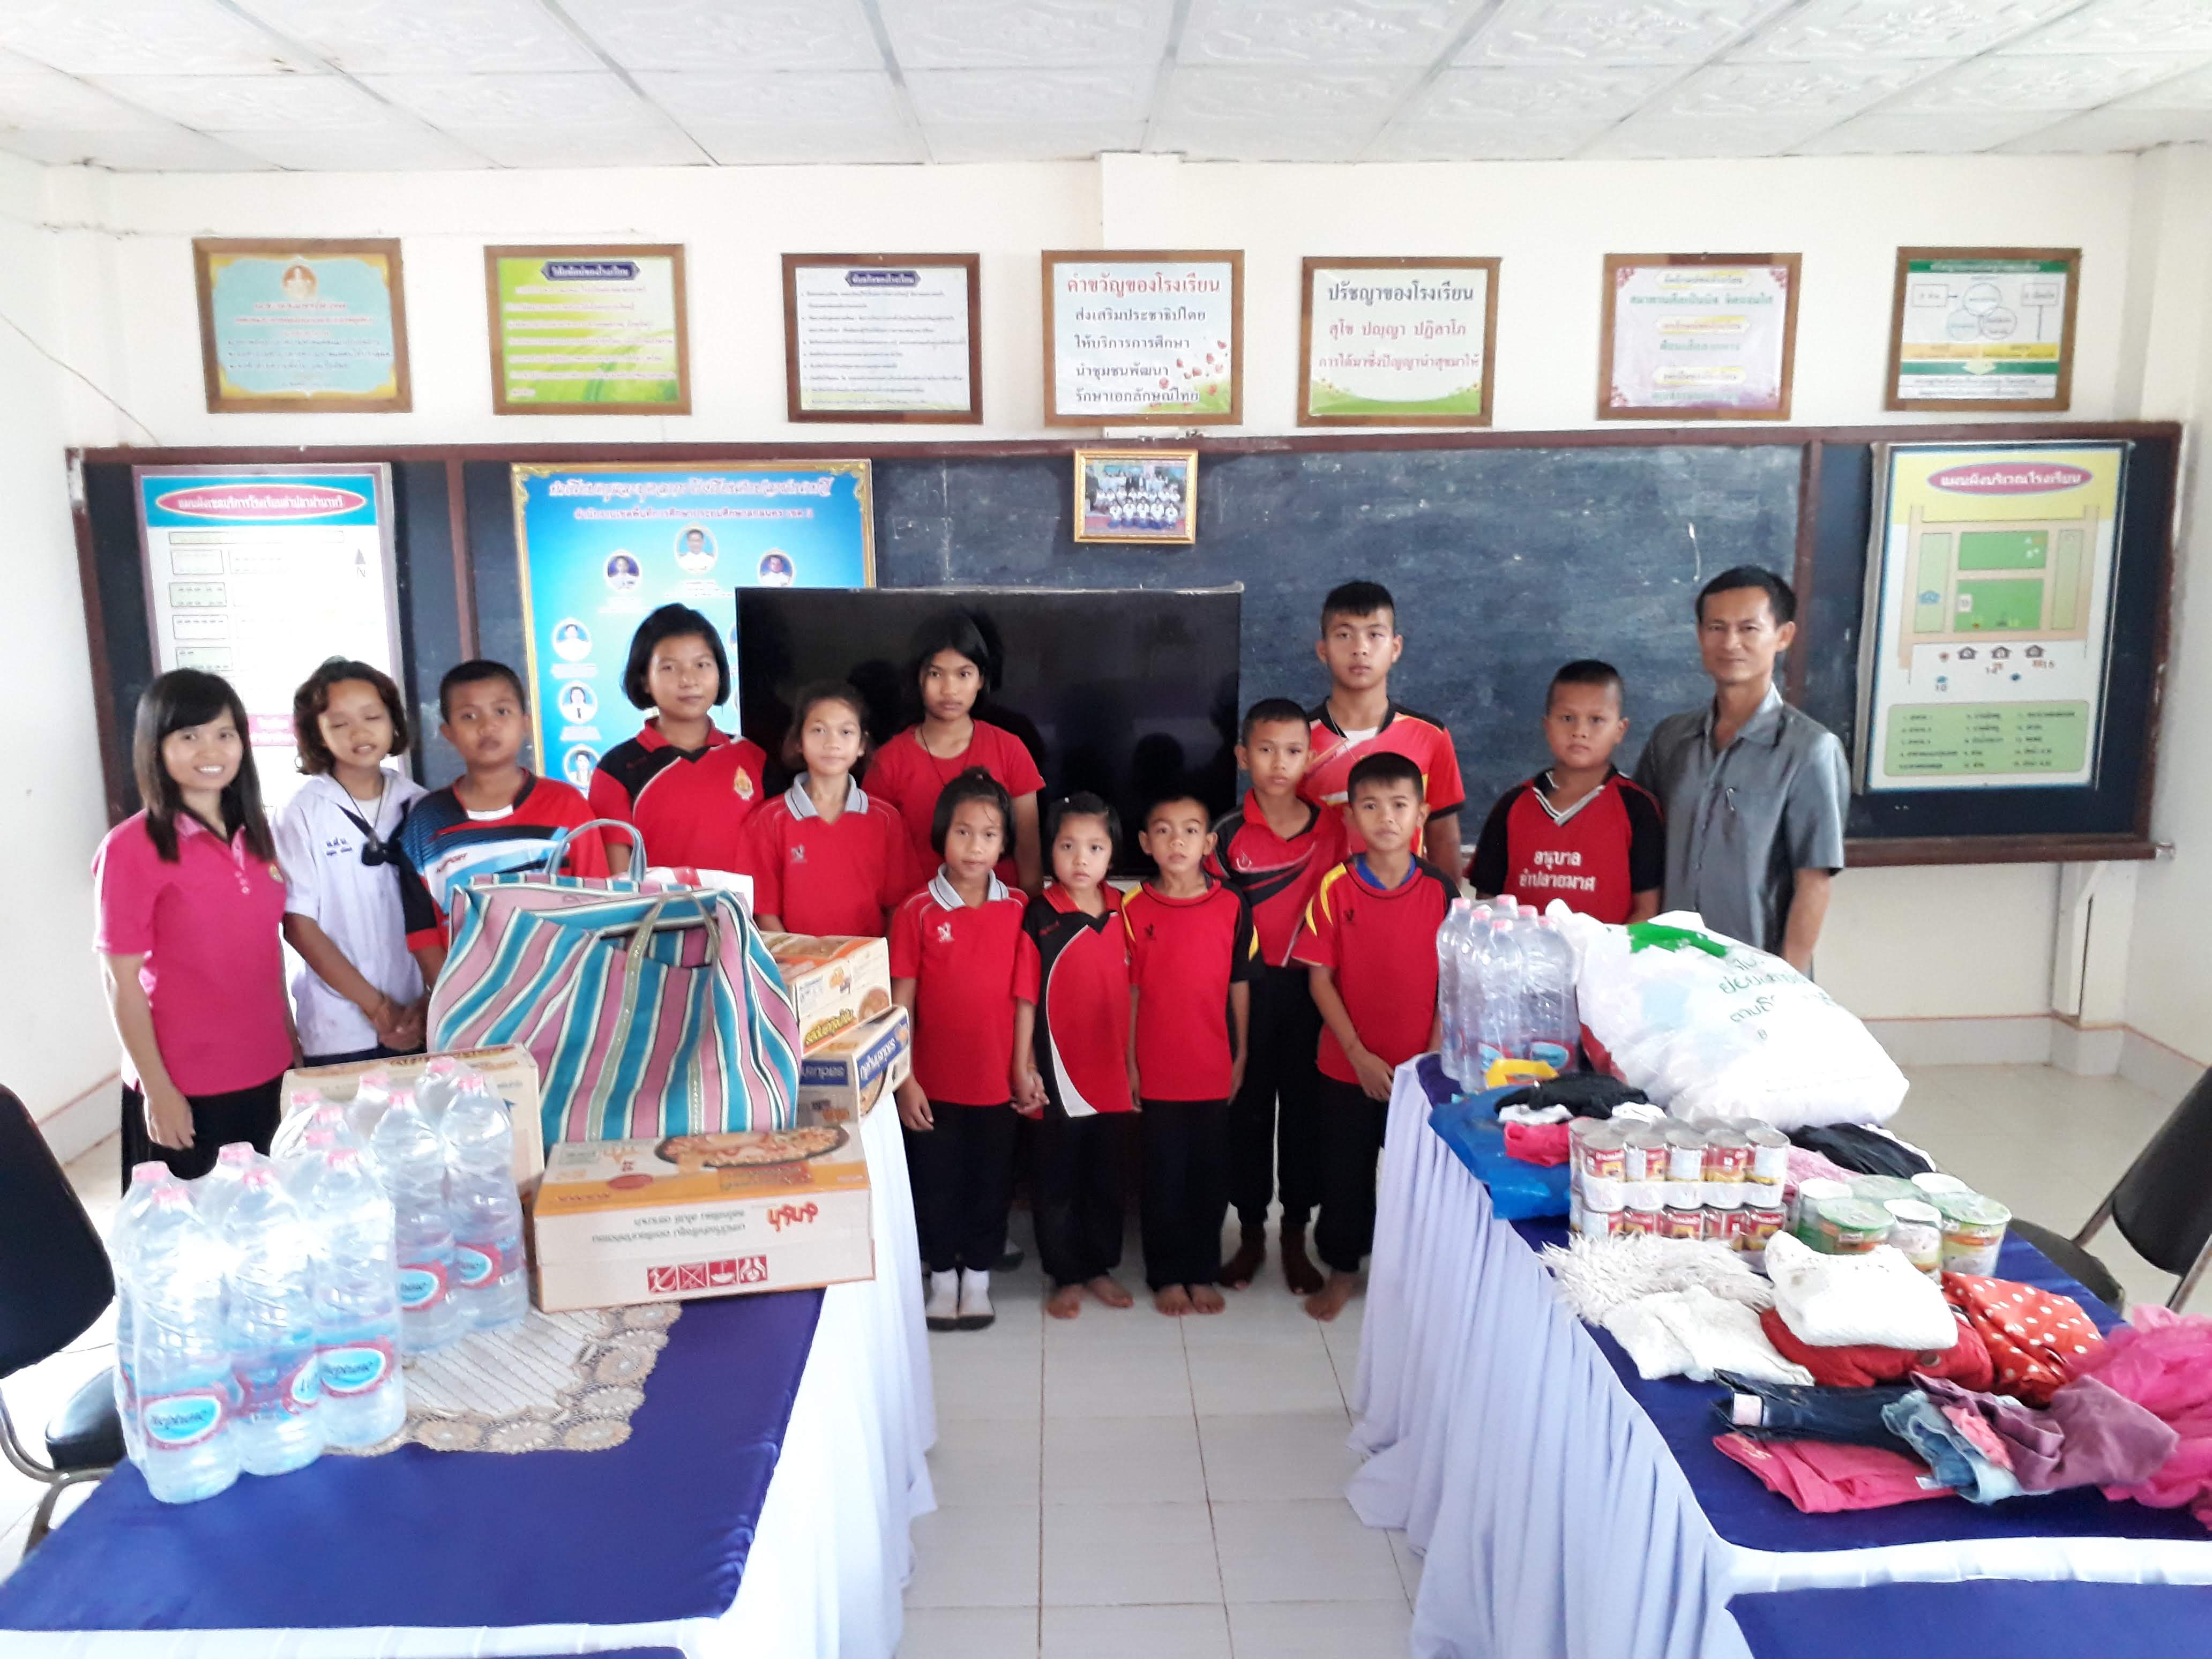 thai students and teacher pose with food, water and clothing